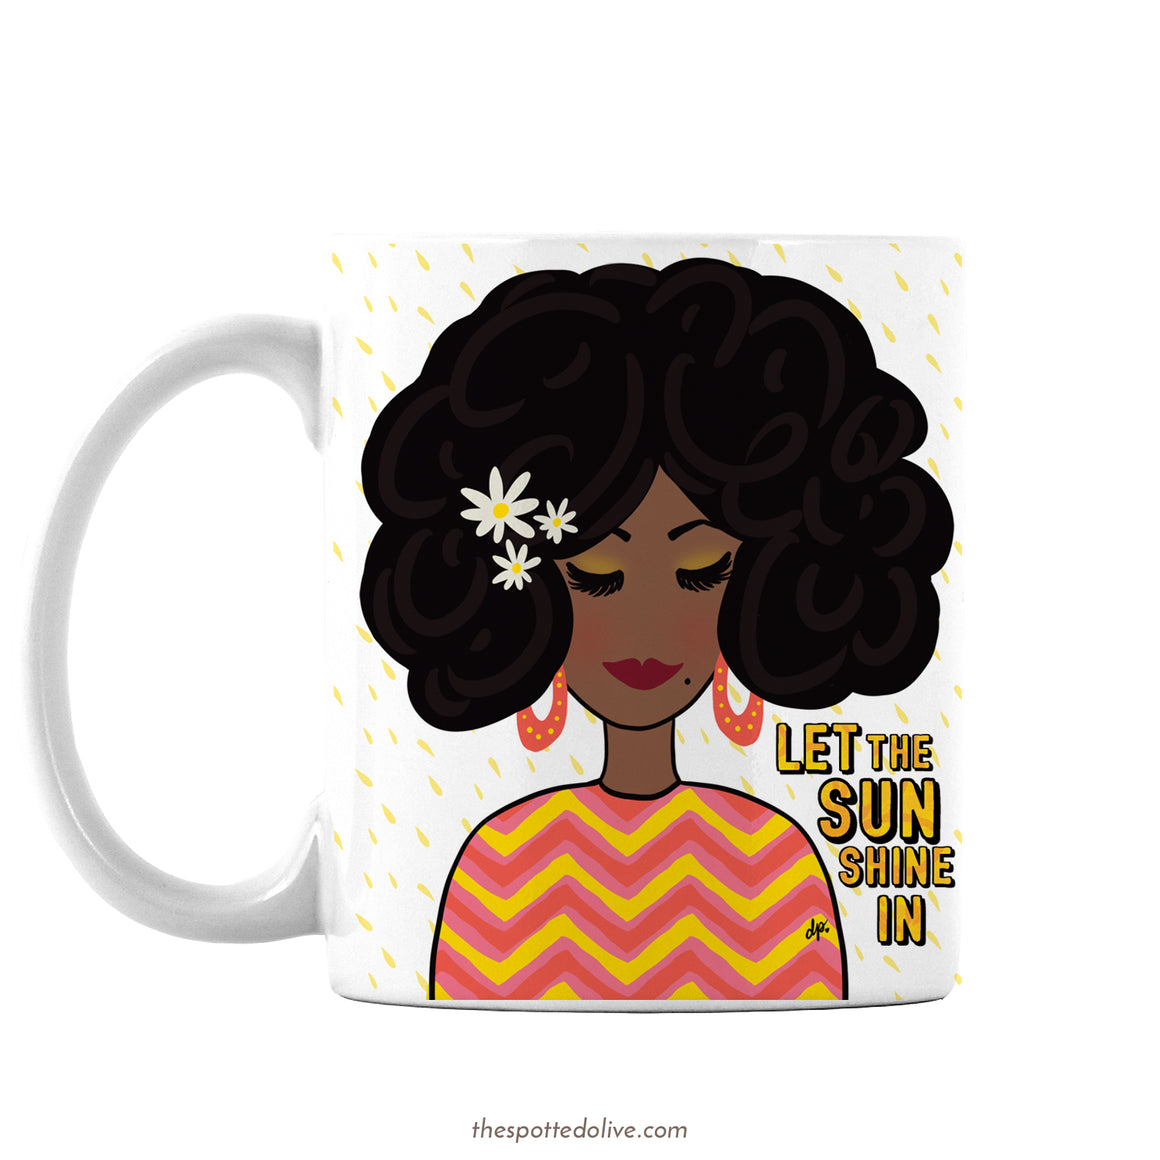 Susnshine Lady Coffee Mug by The Spotted Olive - Left